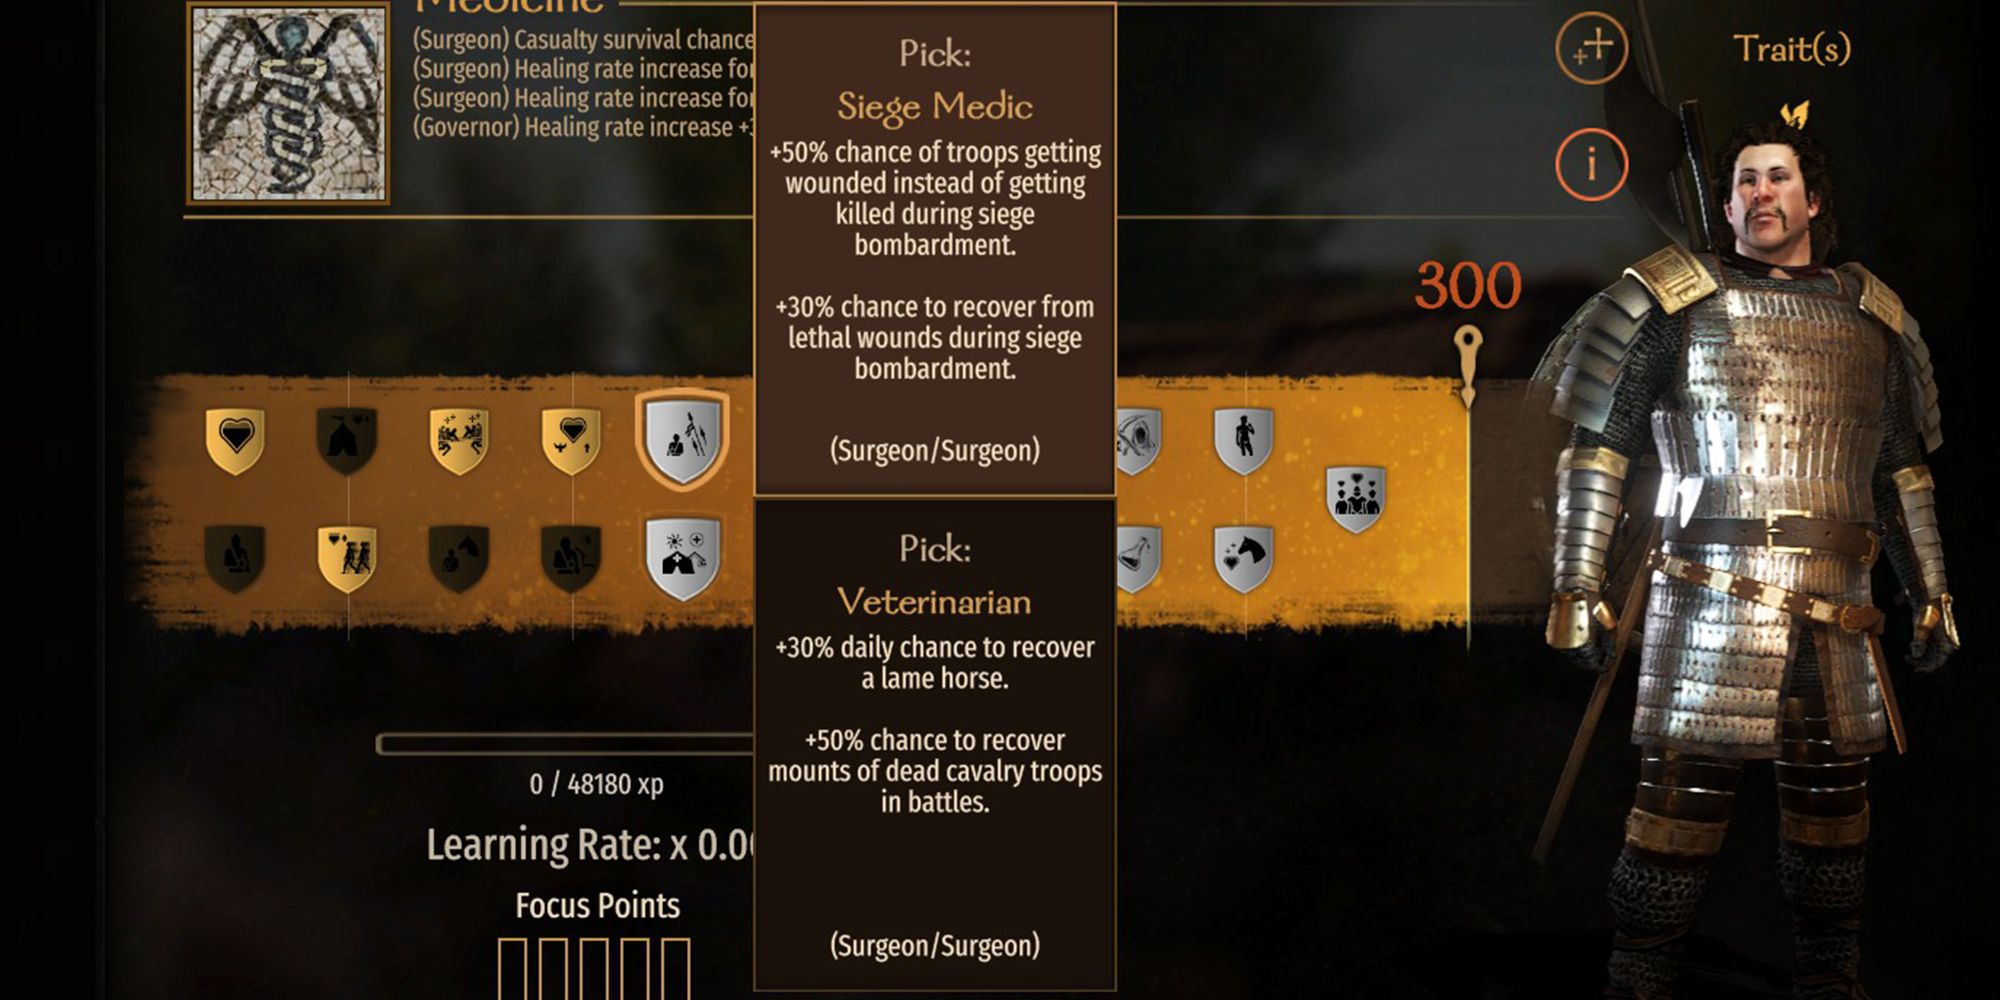 +50% chance of troops getting wounded instead of getting killed during siege bombardment. +30% chance to recover from lethal wounds during siege bombardment.